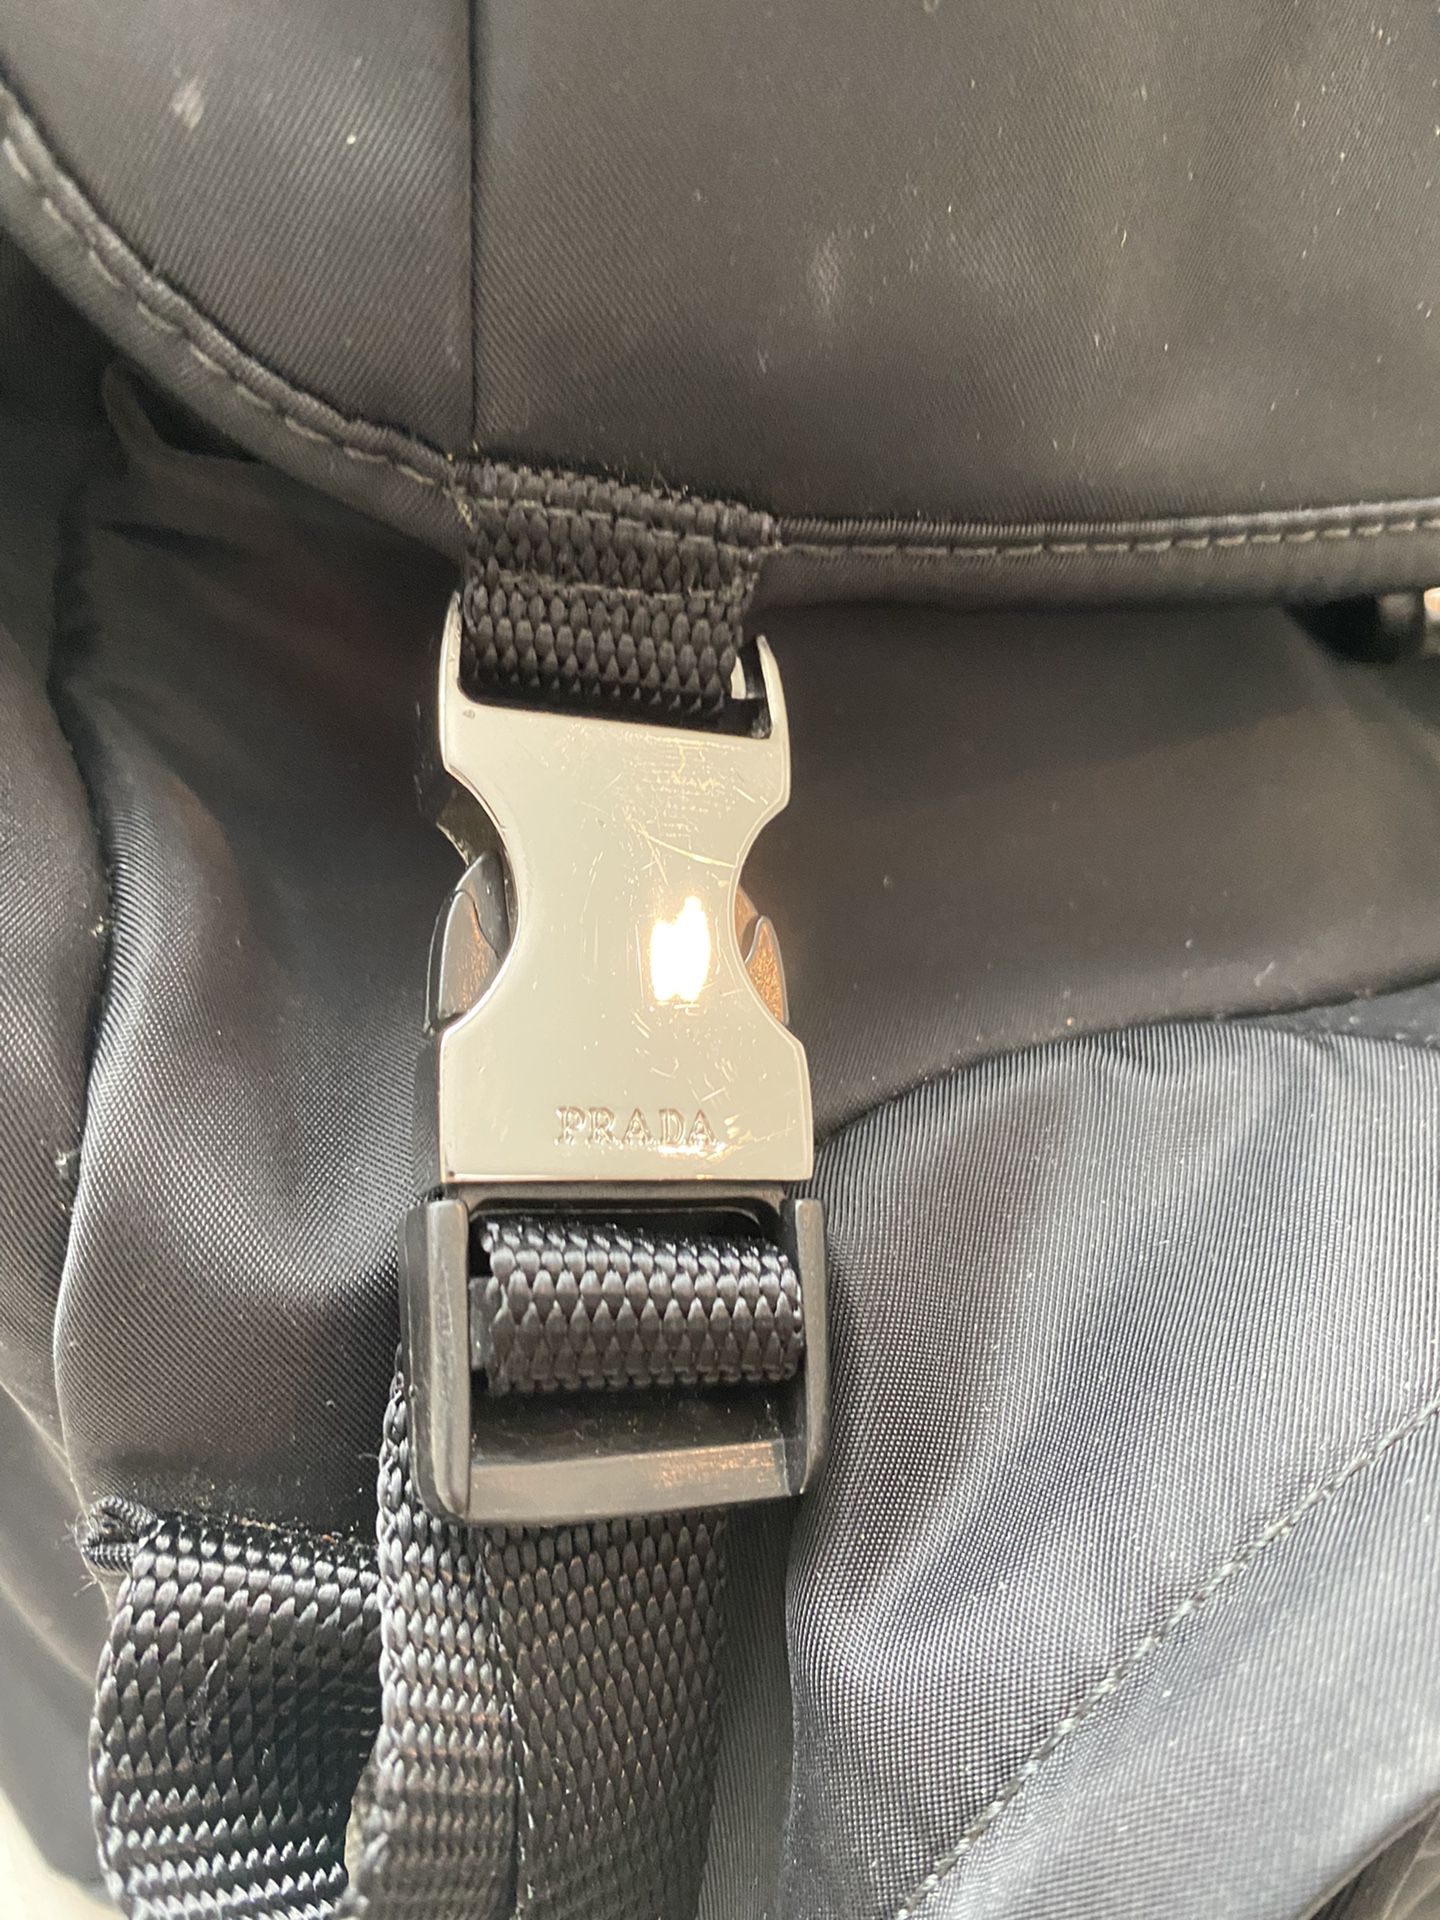 Small Black Prada Backpack for Sale in Hollywood, FL - OfferUp